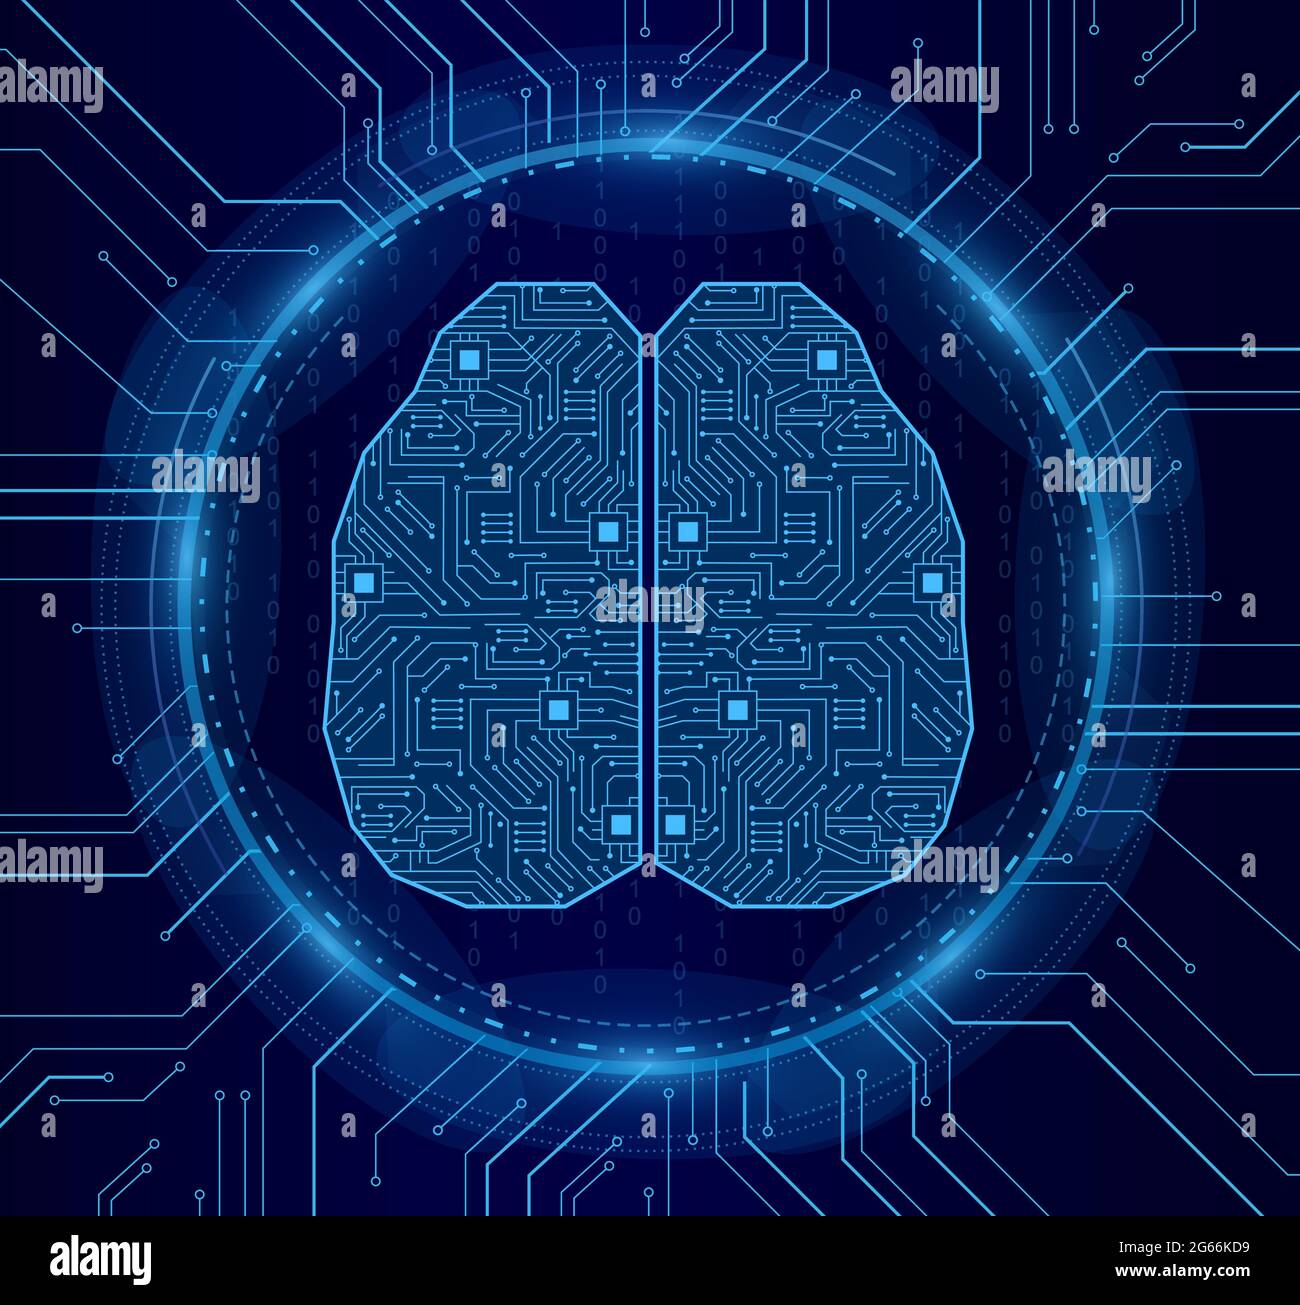 Vector illustration concept of Artificial Intelligence. Digital brain, electronic board in technology look abstract futuristic concept of Artificial Stock Vector